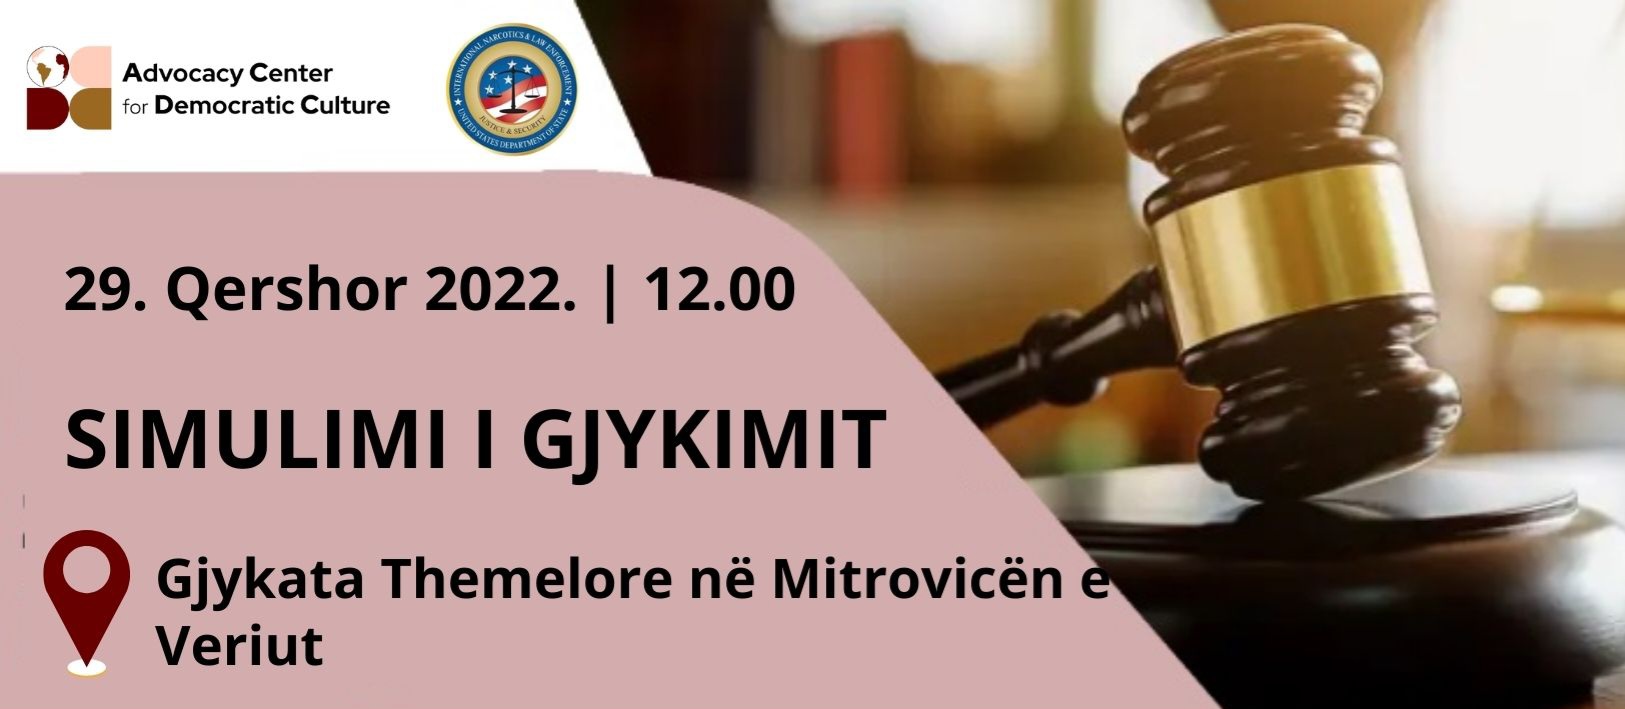 ftese-simulimi-i-gjykimit-moot-court-trial-29-qershor-2022-1200-1400